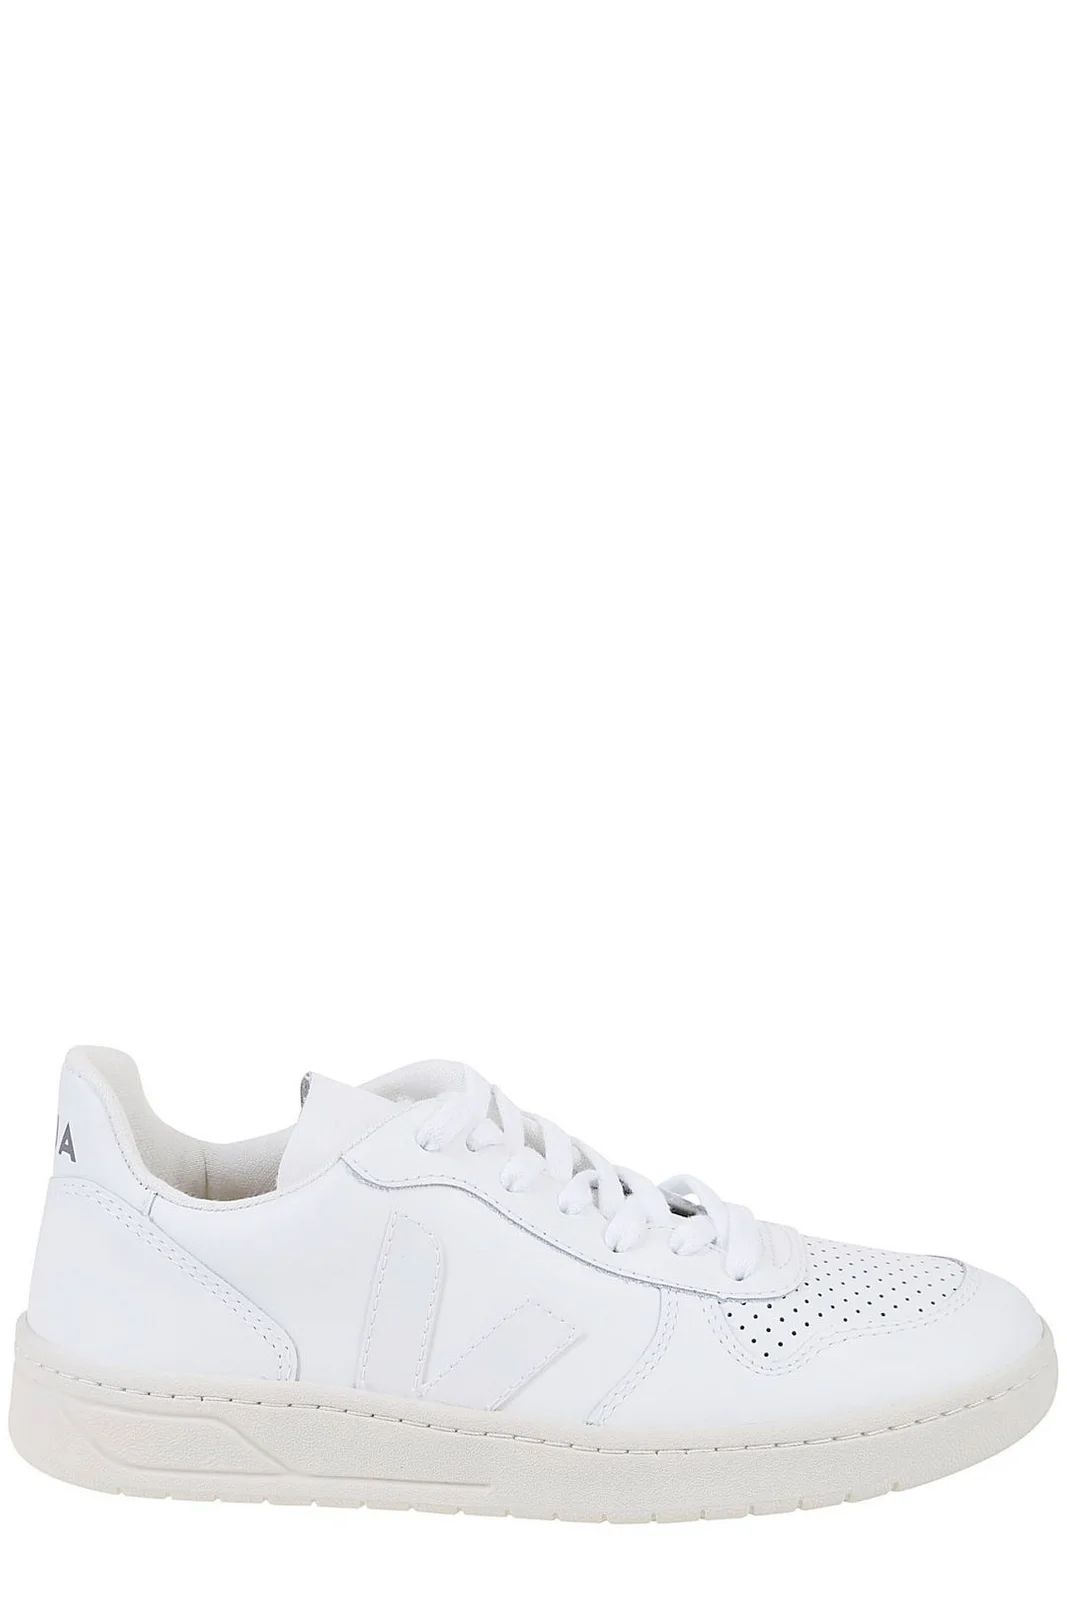 Veja V-10 Lace-Up Sneakers | Cettire Global